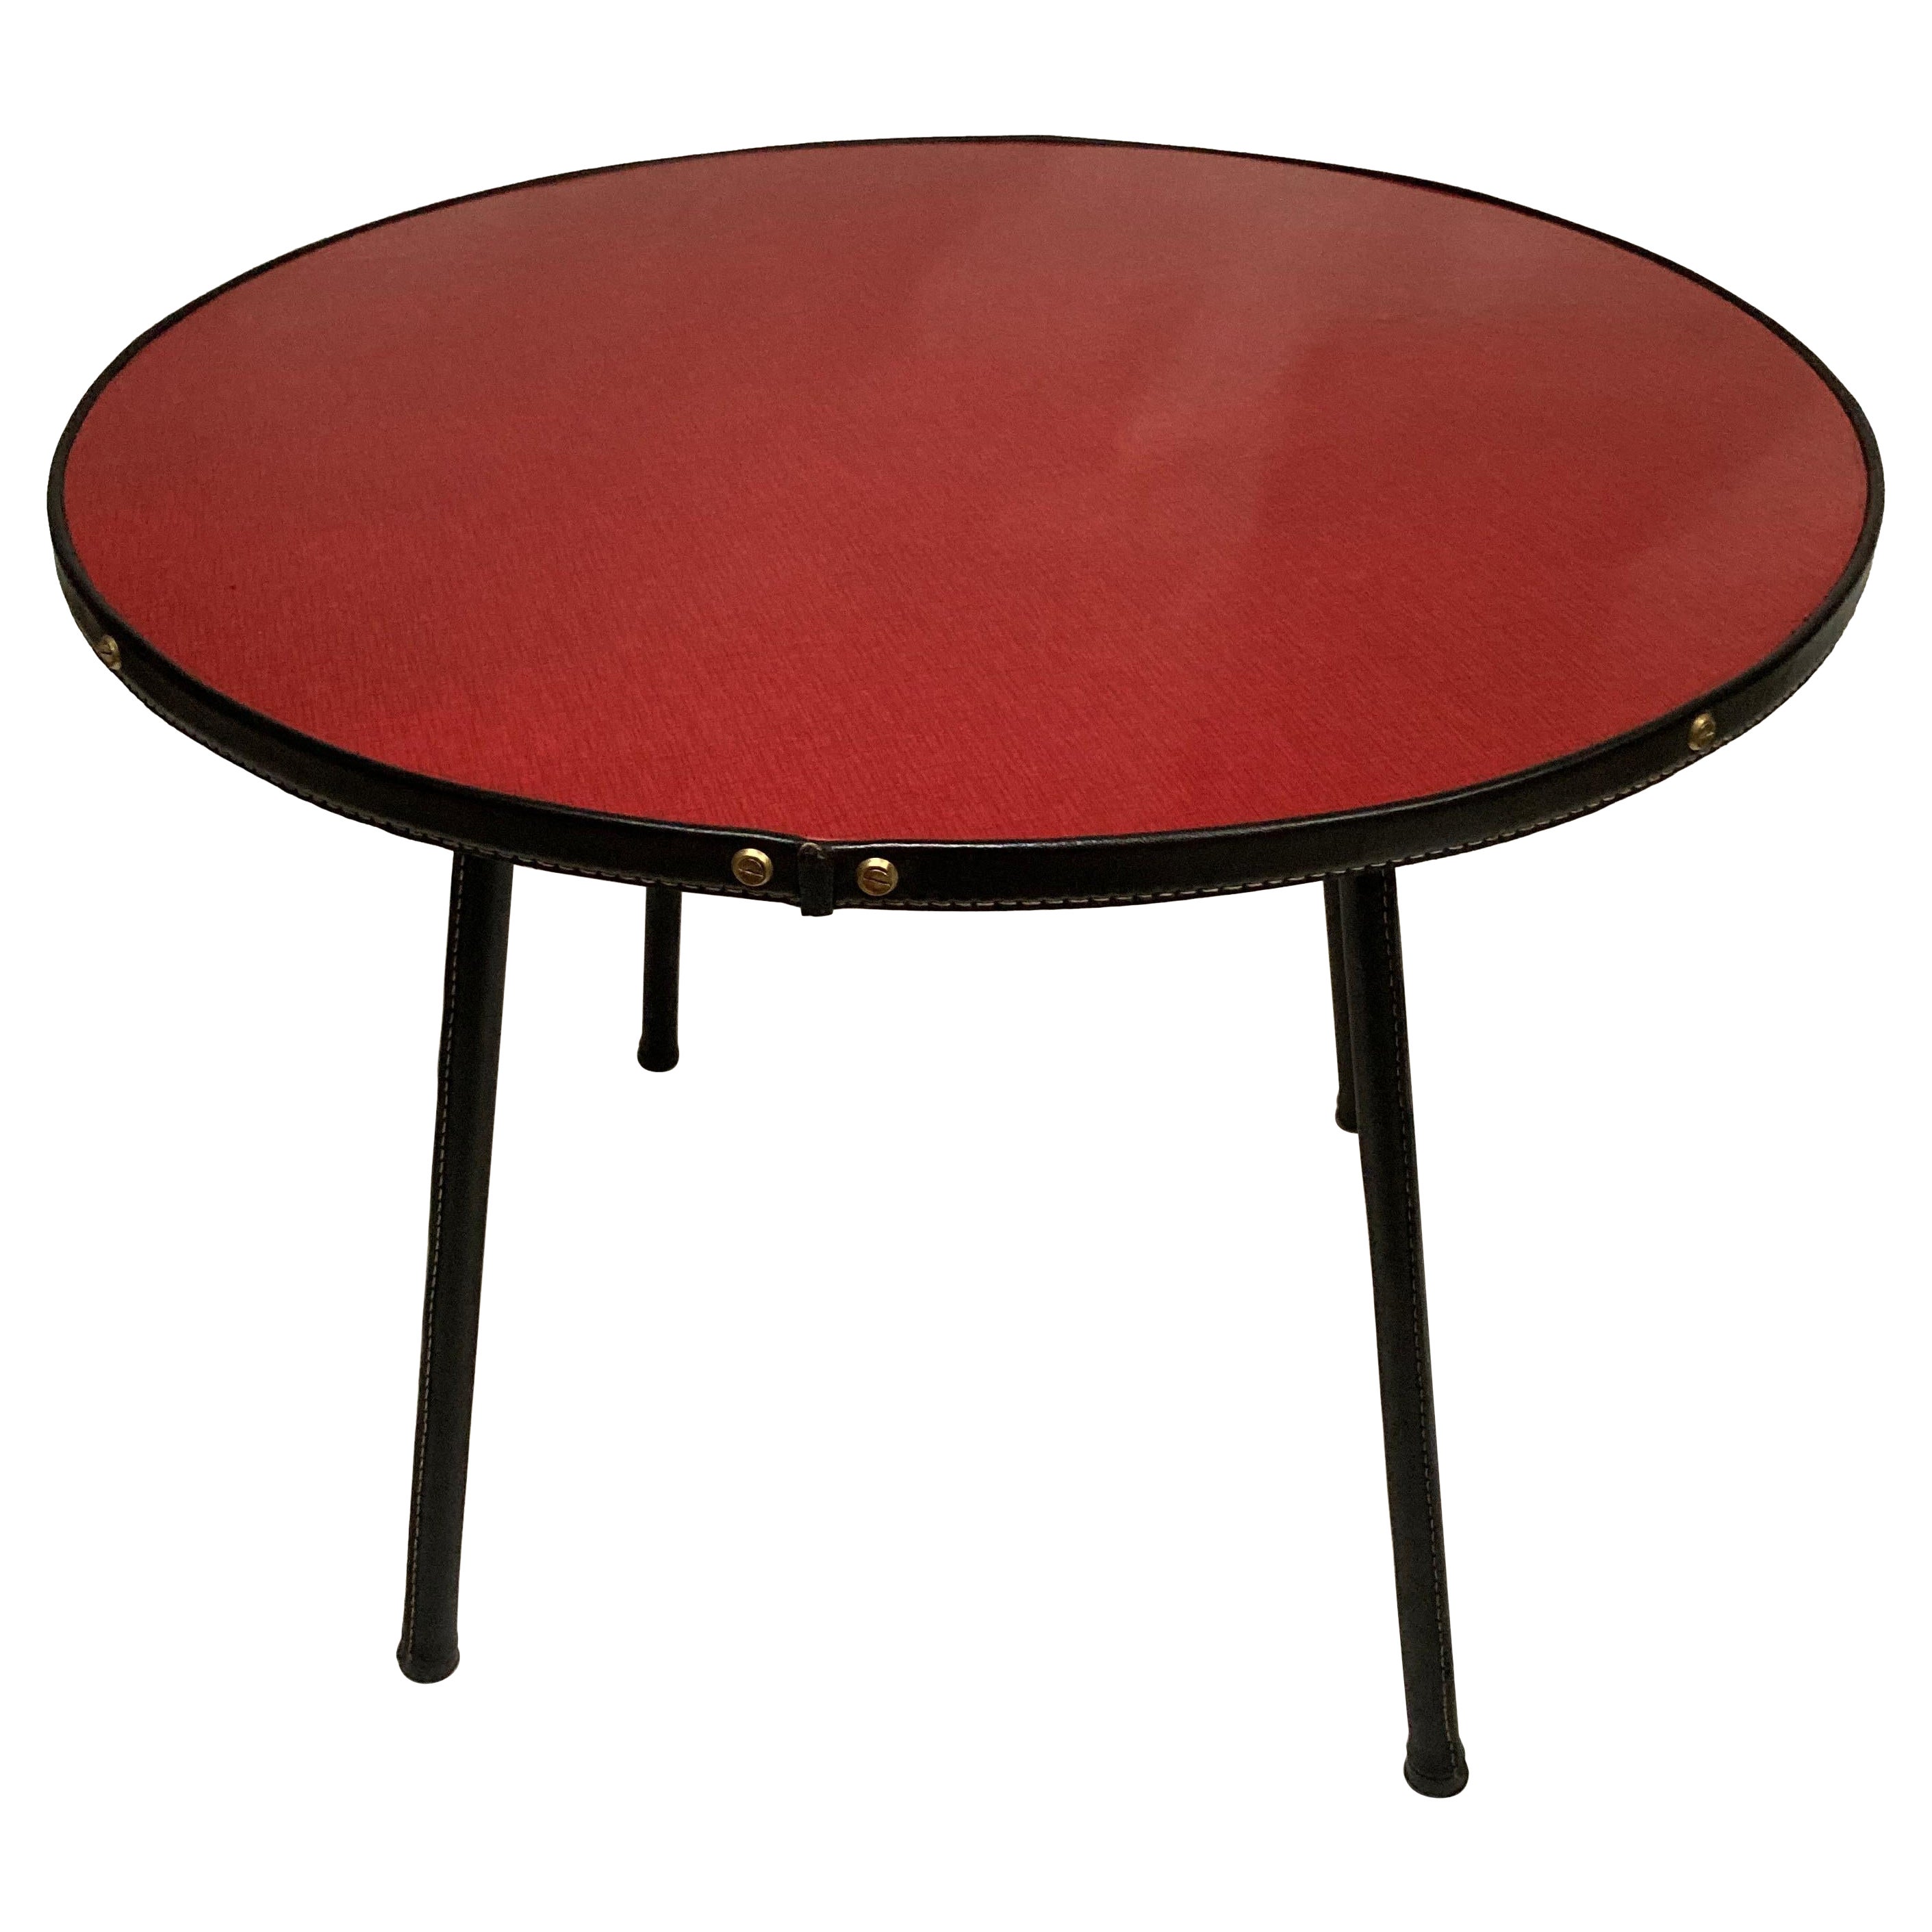 1950's Stitched Leather and formica Circular table by Jacques Adnet For Sale